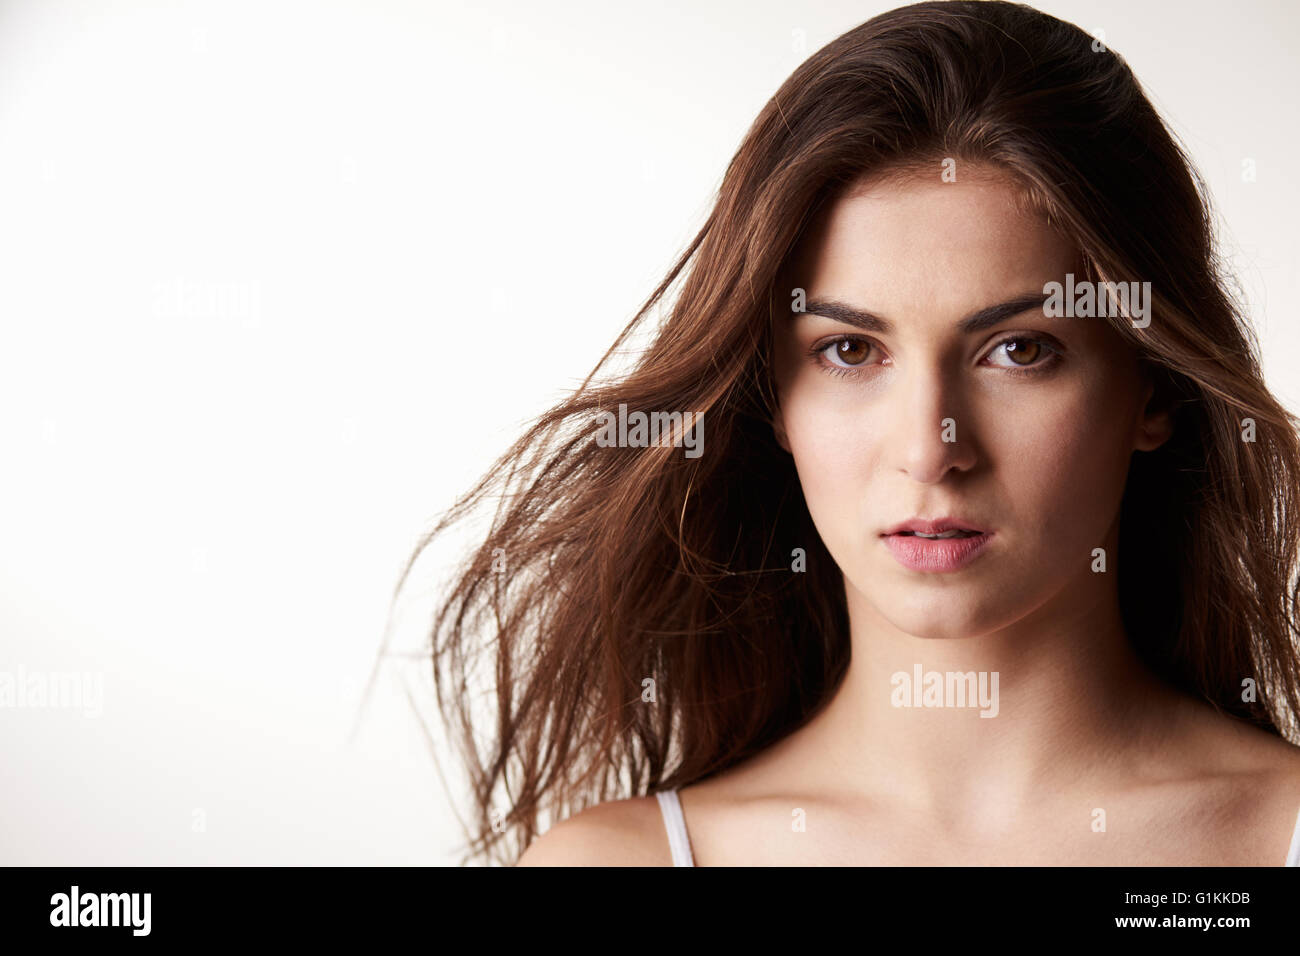 Dark haired girl in late teens with serious expression Stock Photo